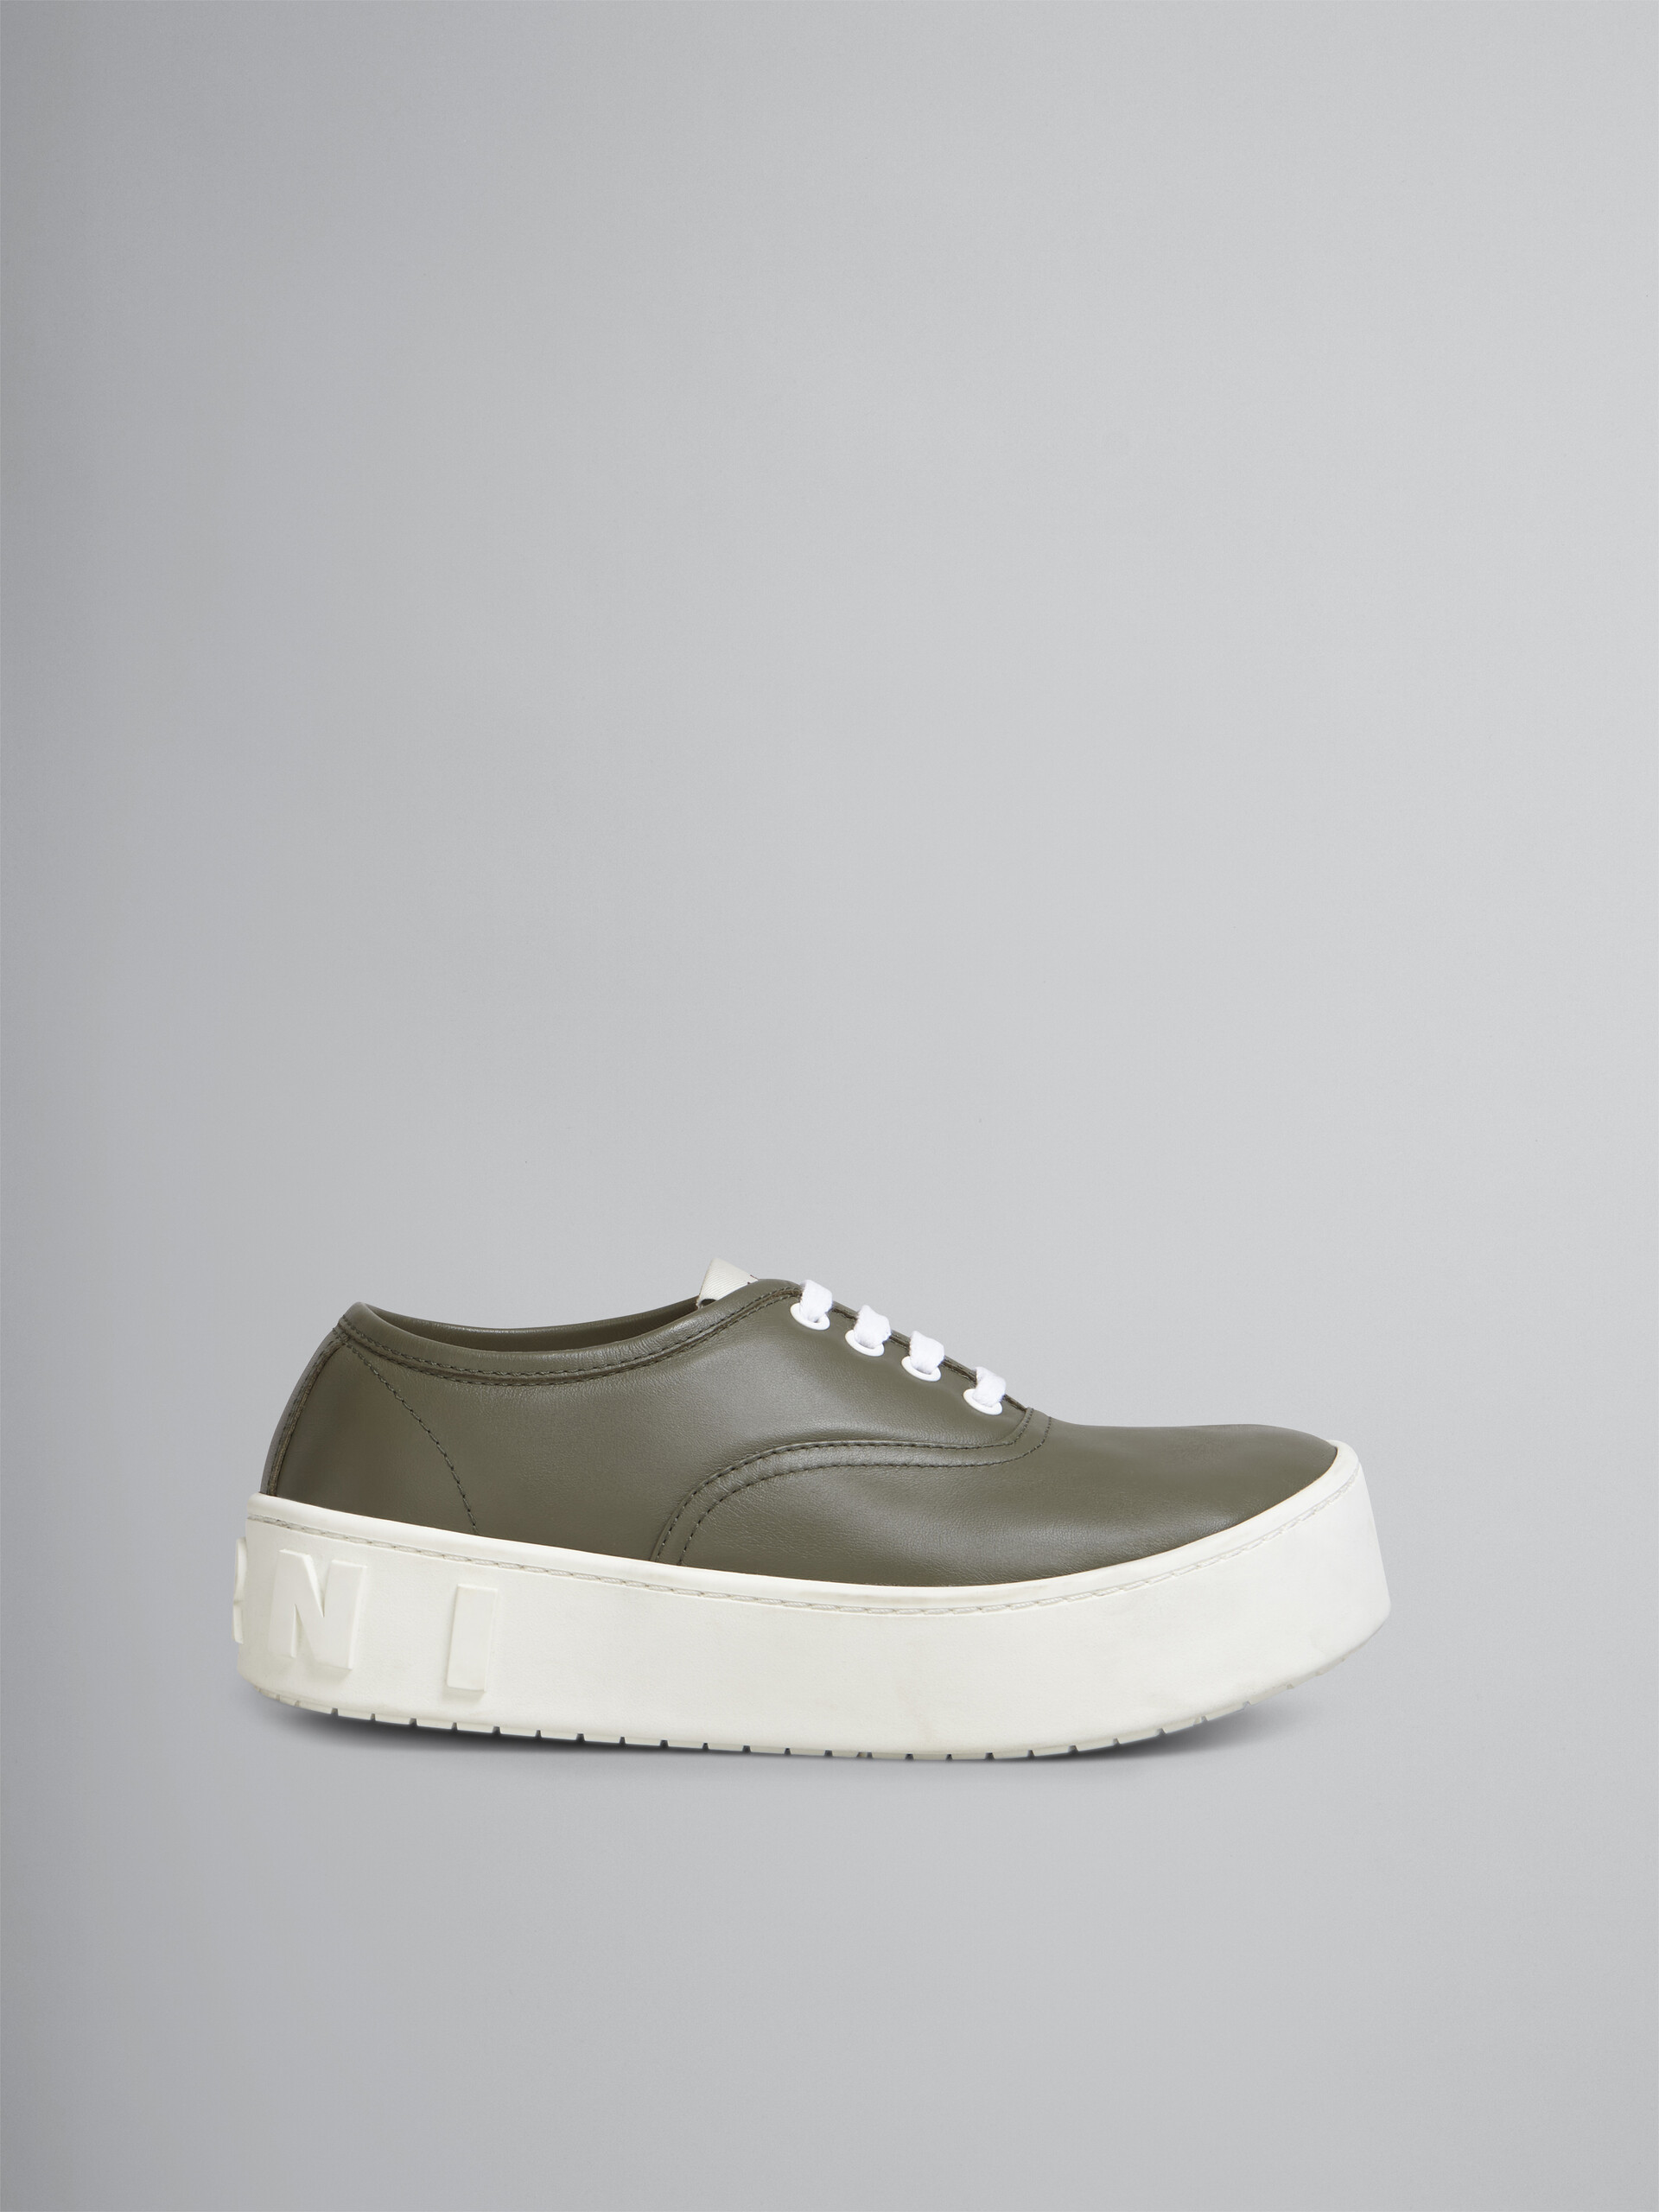 Green smooth calfskin sneaker with raised maxi Marni logo - Sneakers - Image 1